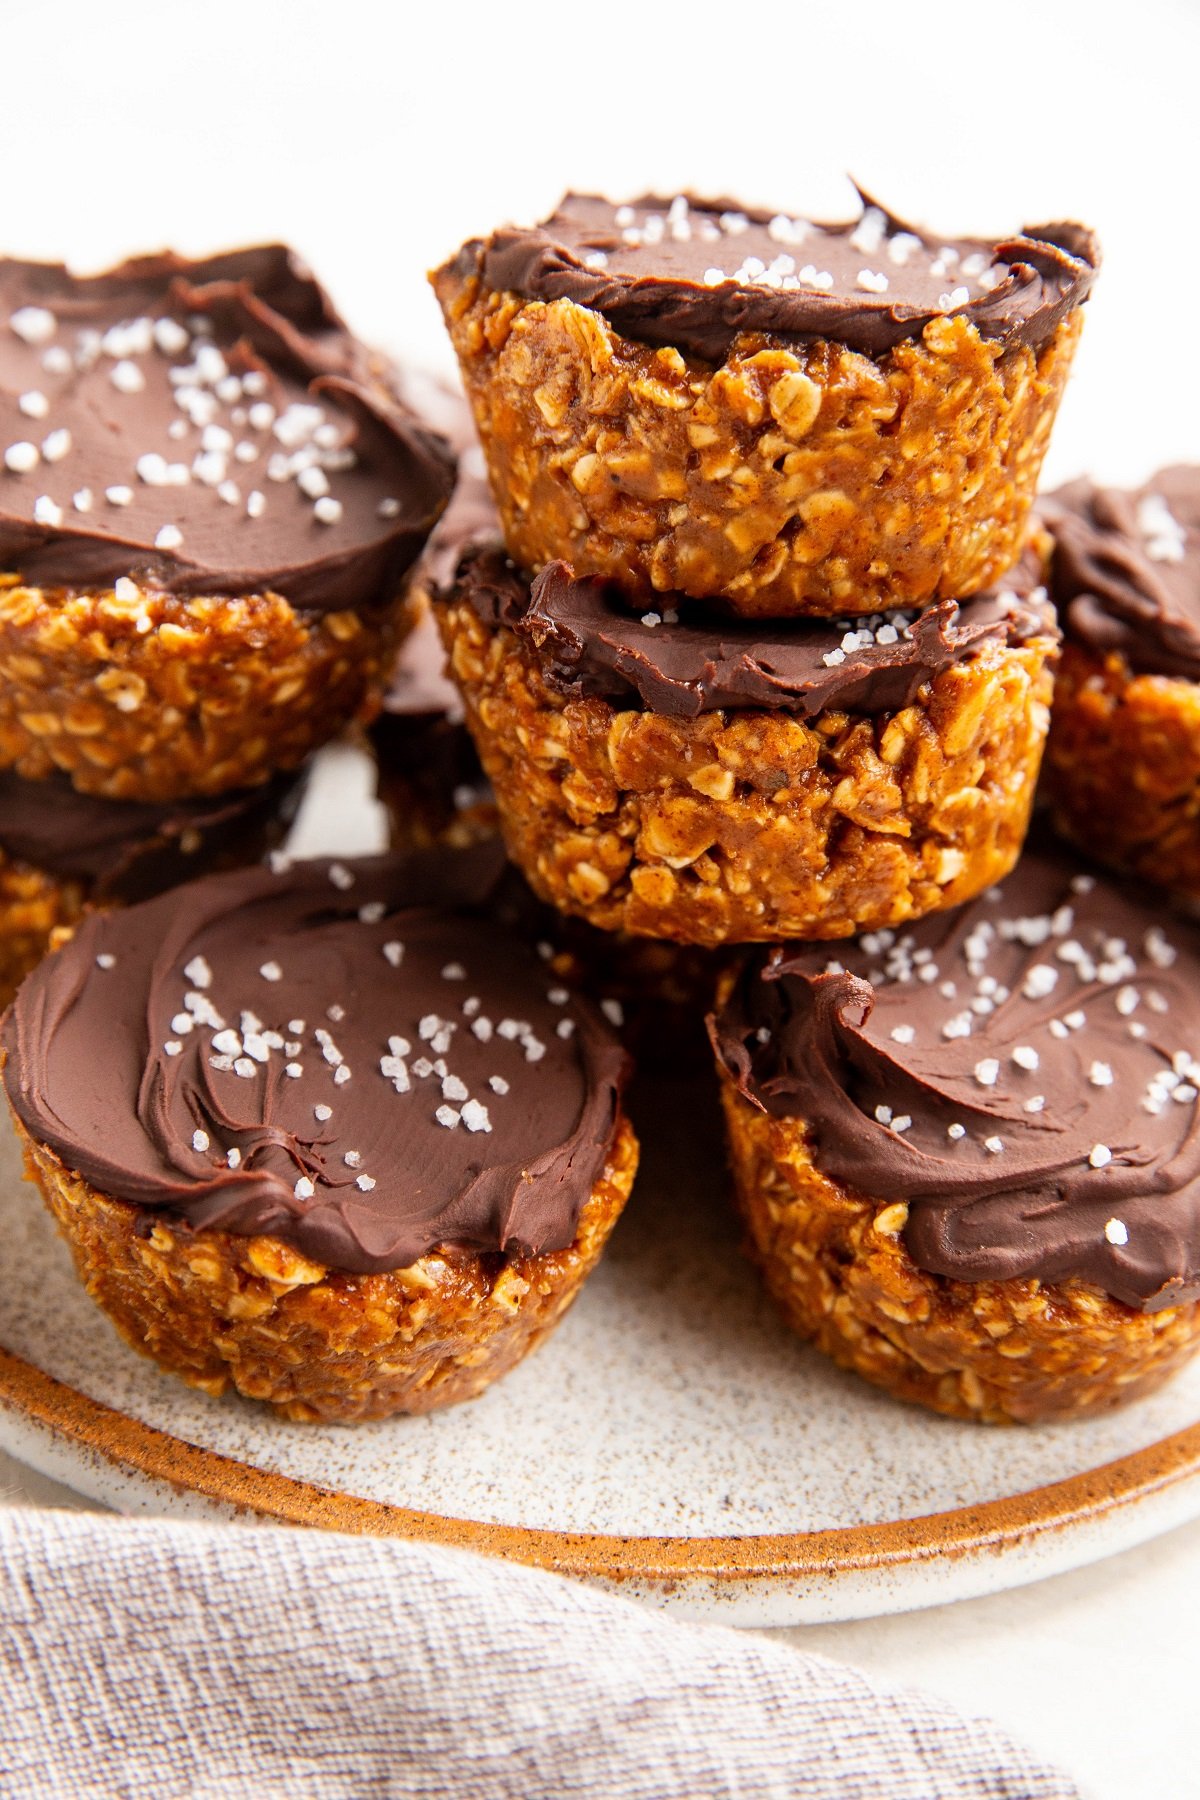 Plate of pumpkin oatmeal cups with chocolate layer on top.